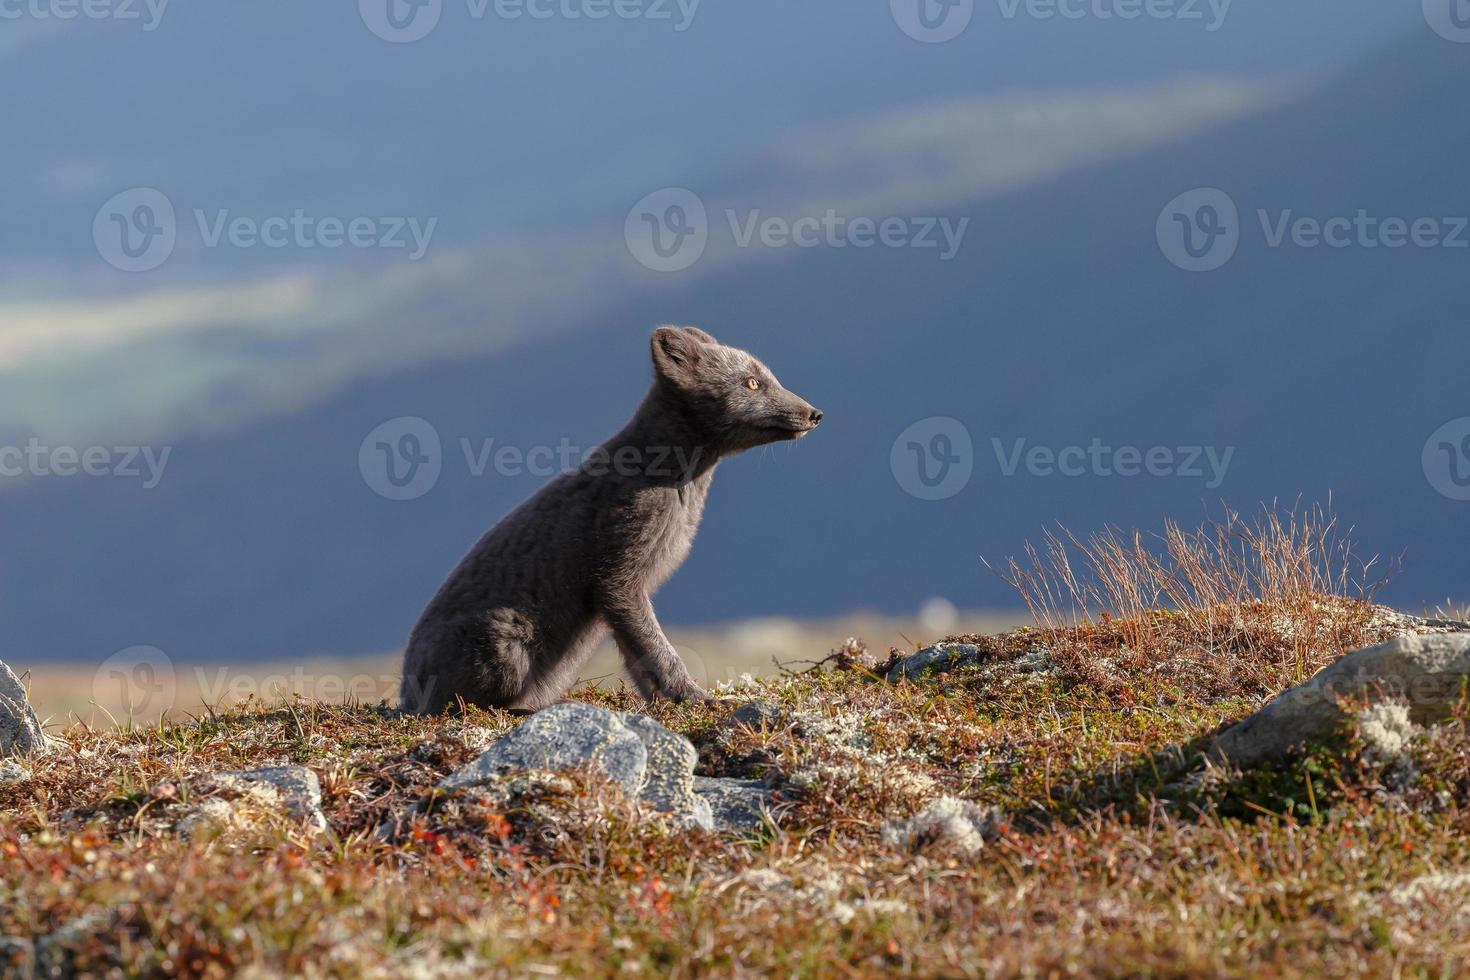 The Arctic Fox at Norway photo